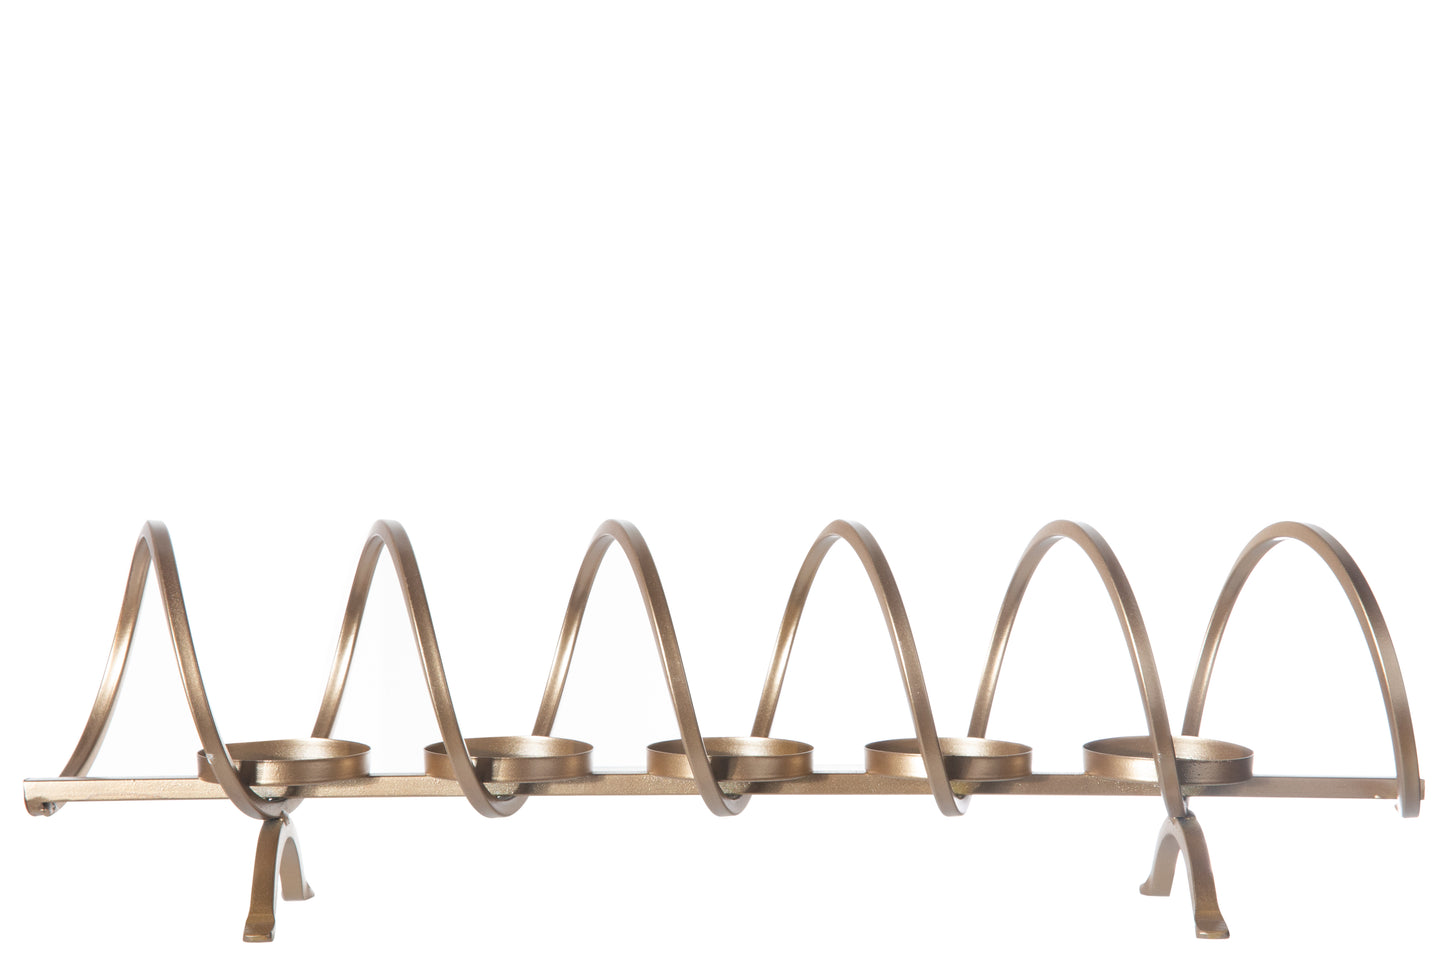 Metal Clustered Candle Holders with Stand and Top Spiral Design